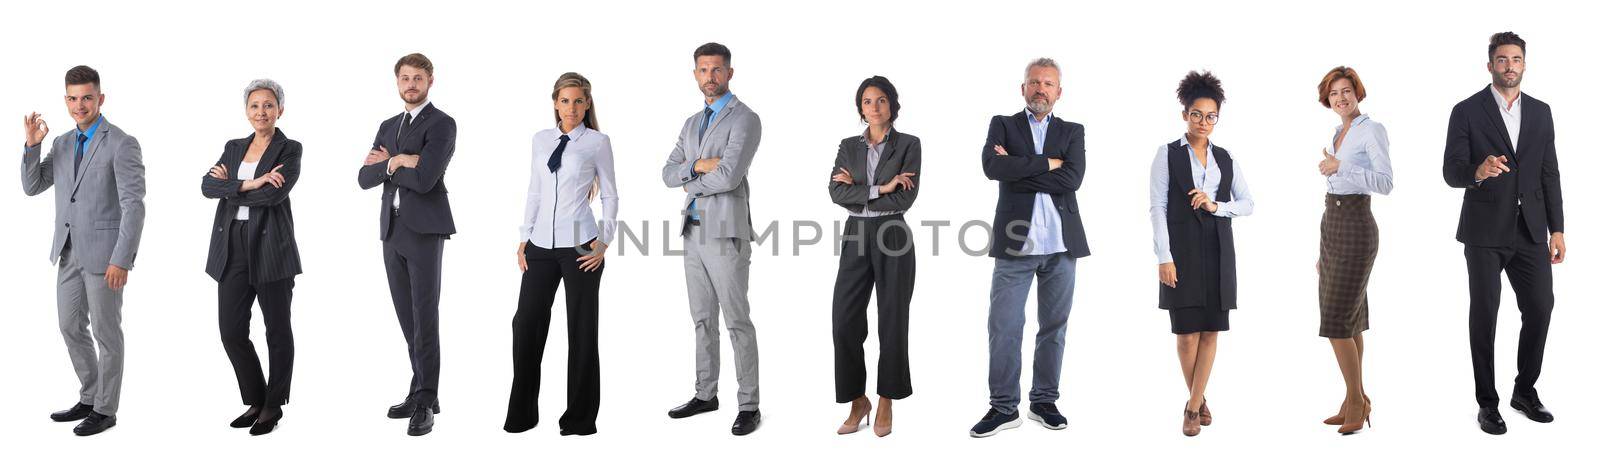 Successful business people team, full length portrait studio isolated on white background